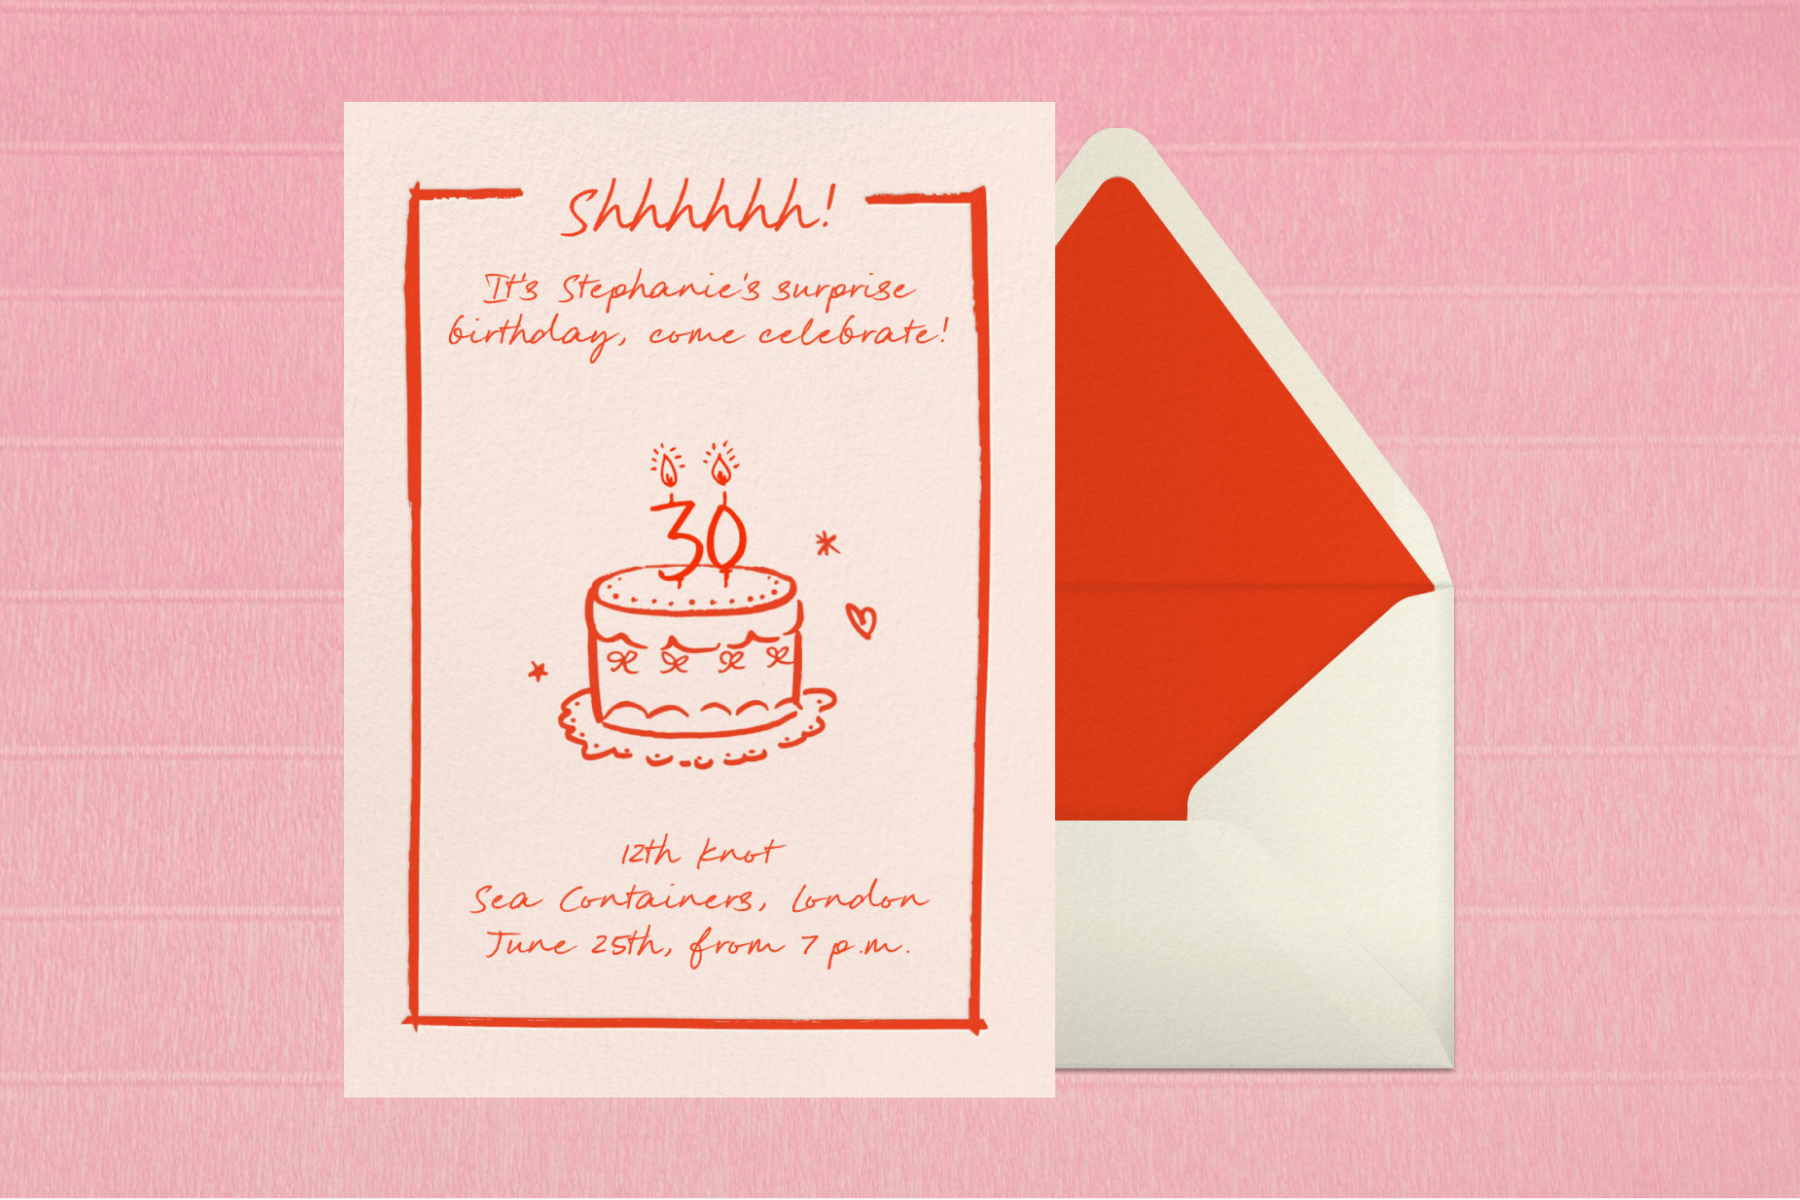 A surprise 30th birthday invitation with red lettering and a drawing of a cake over a pink background.